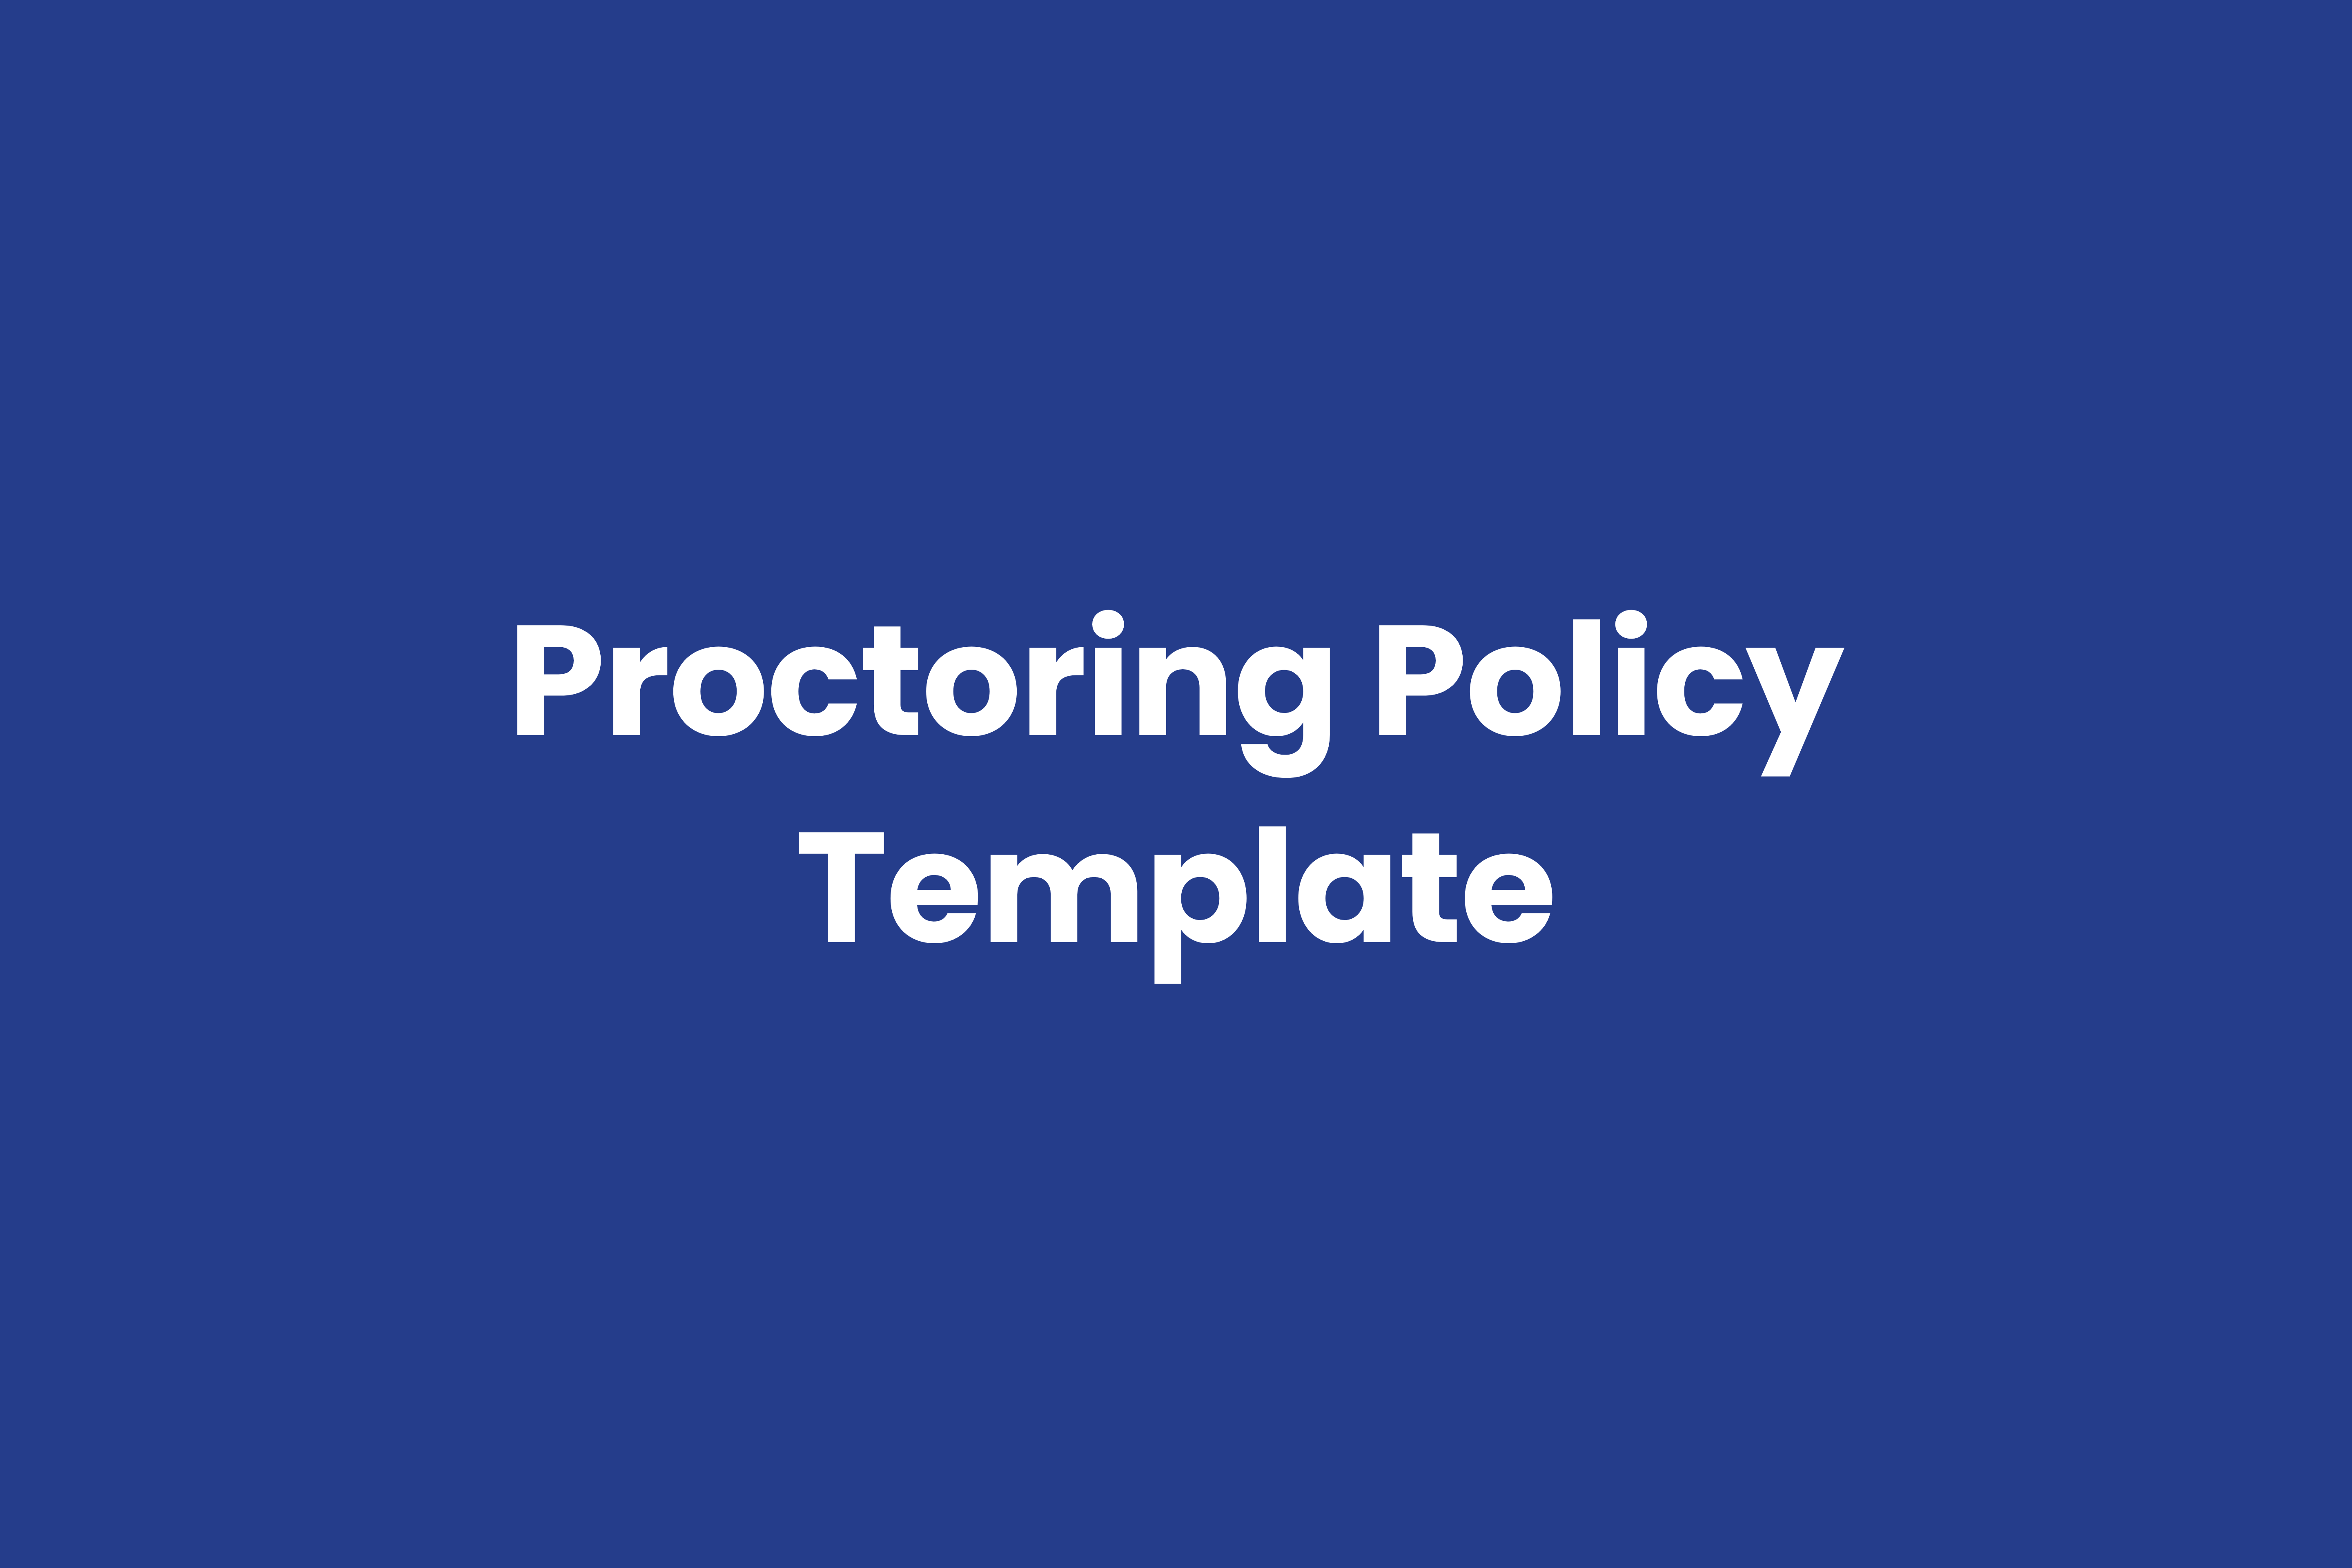 copy and paste template for higher education remote proctoring policies